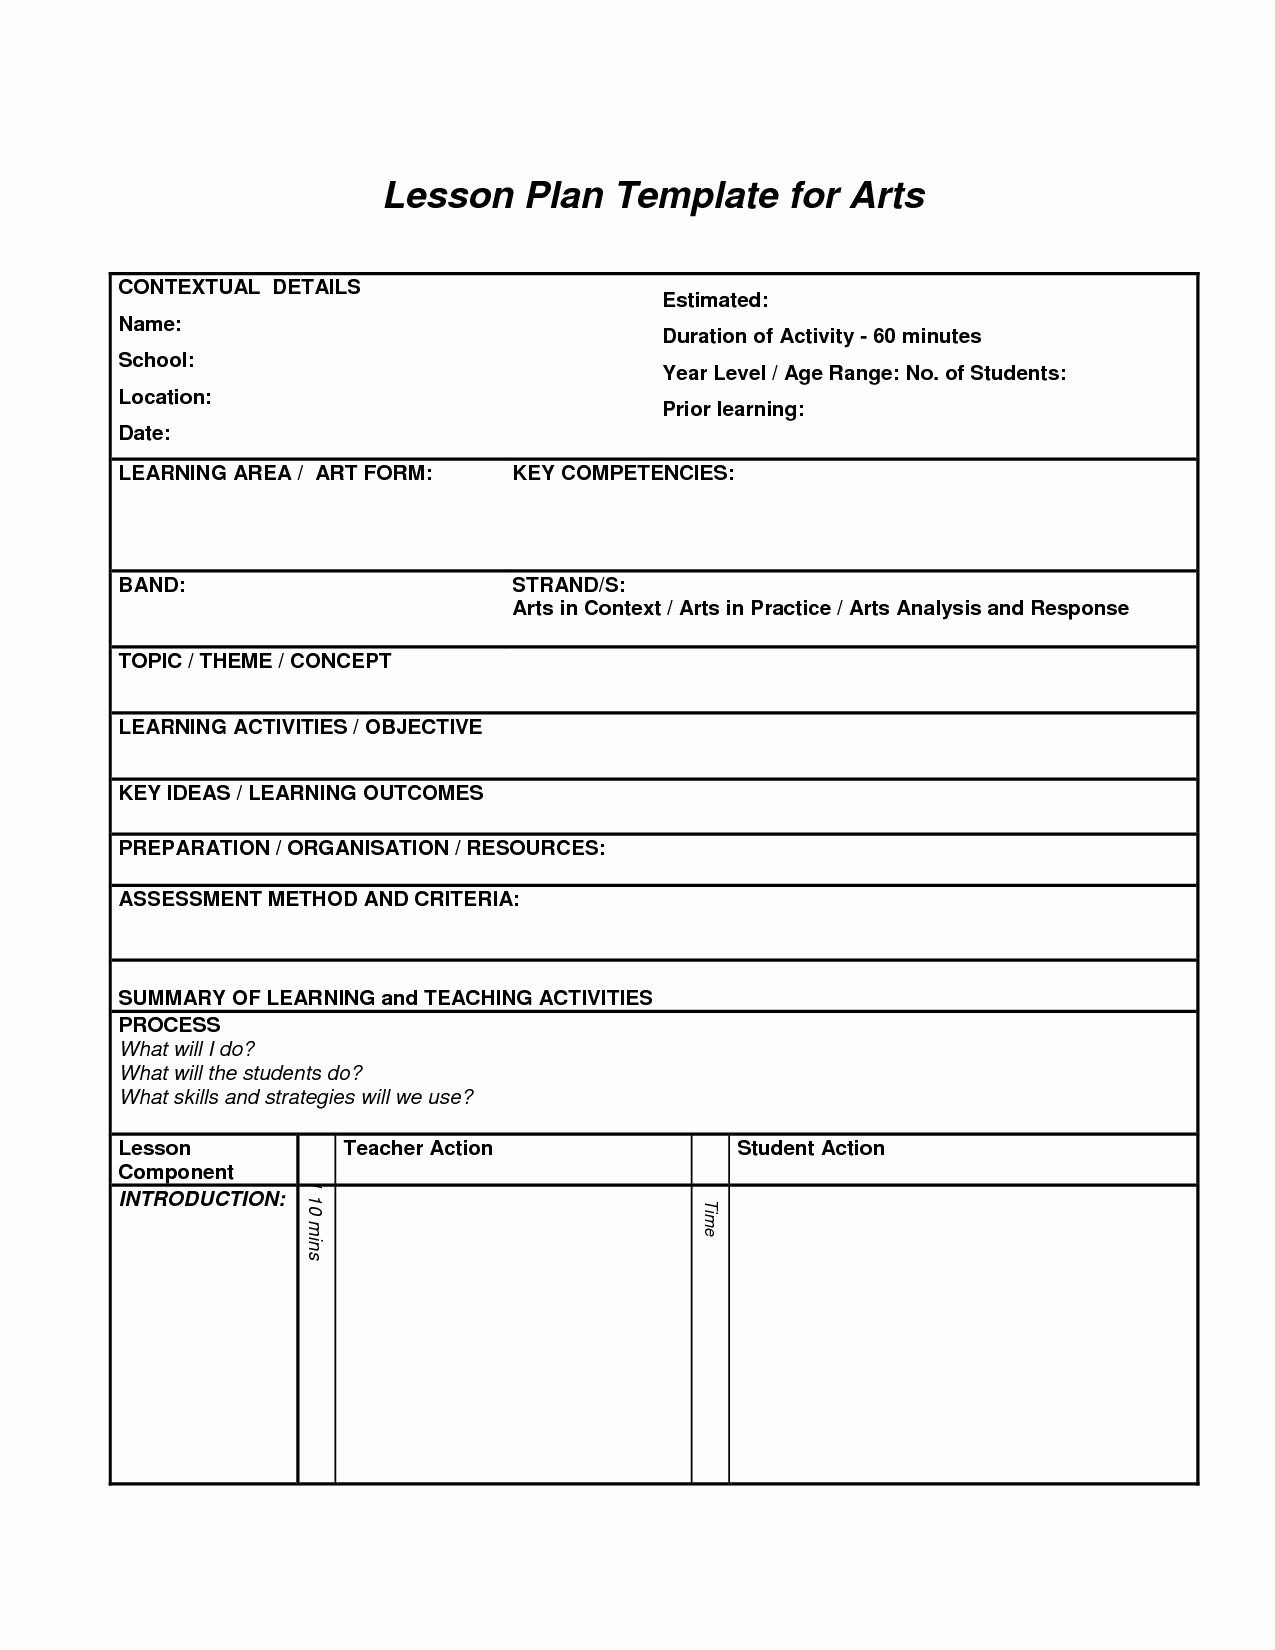 Elementary Lesson Plan Template Luxury Lesson Plan Template for Arts